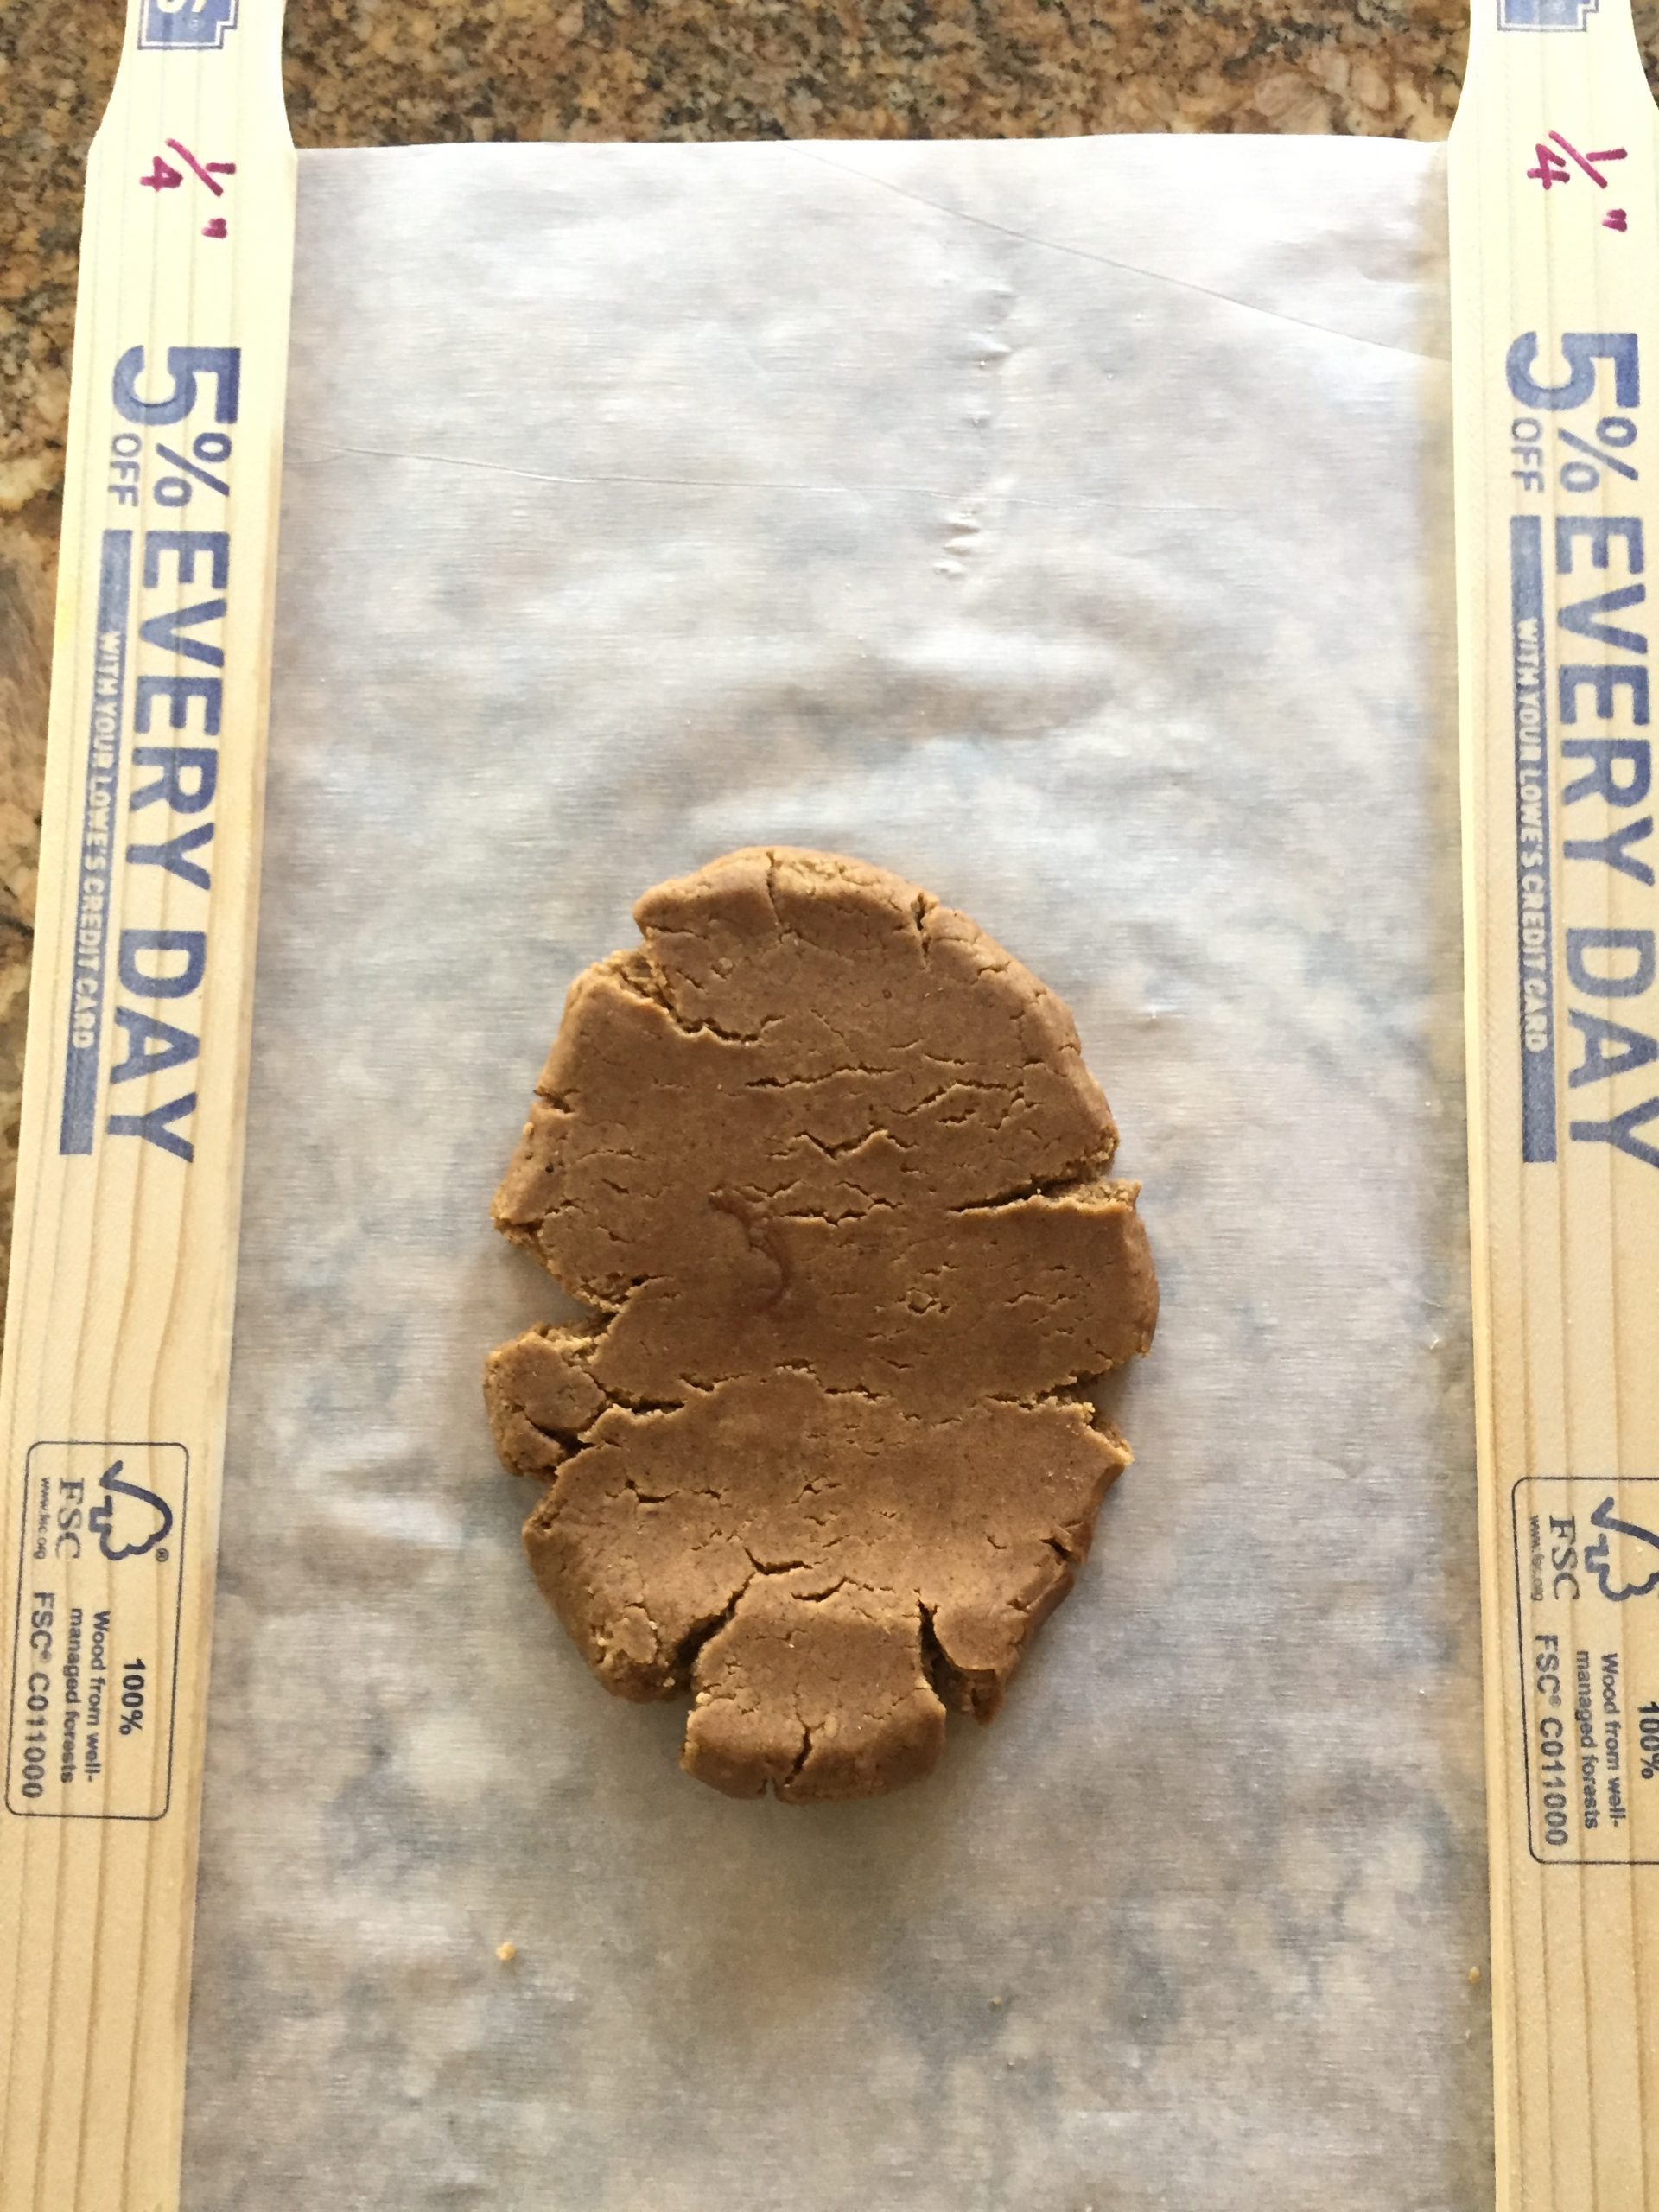 Use parchment paper when rolling cookies to prevent sticking